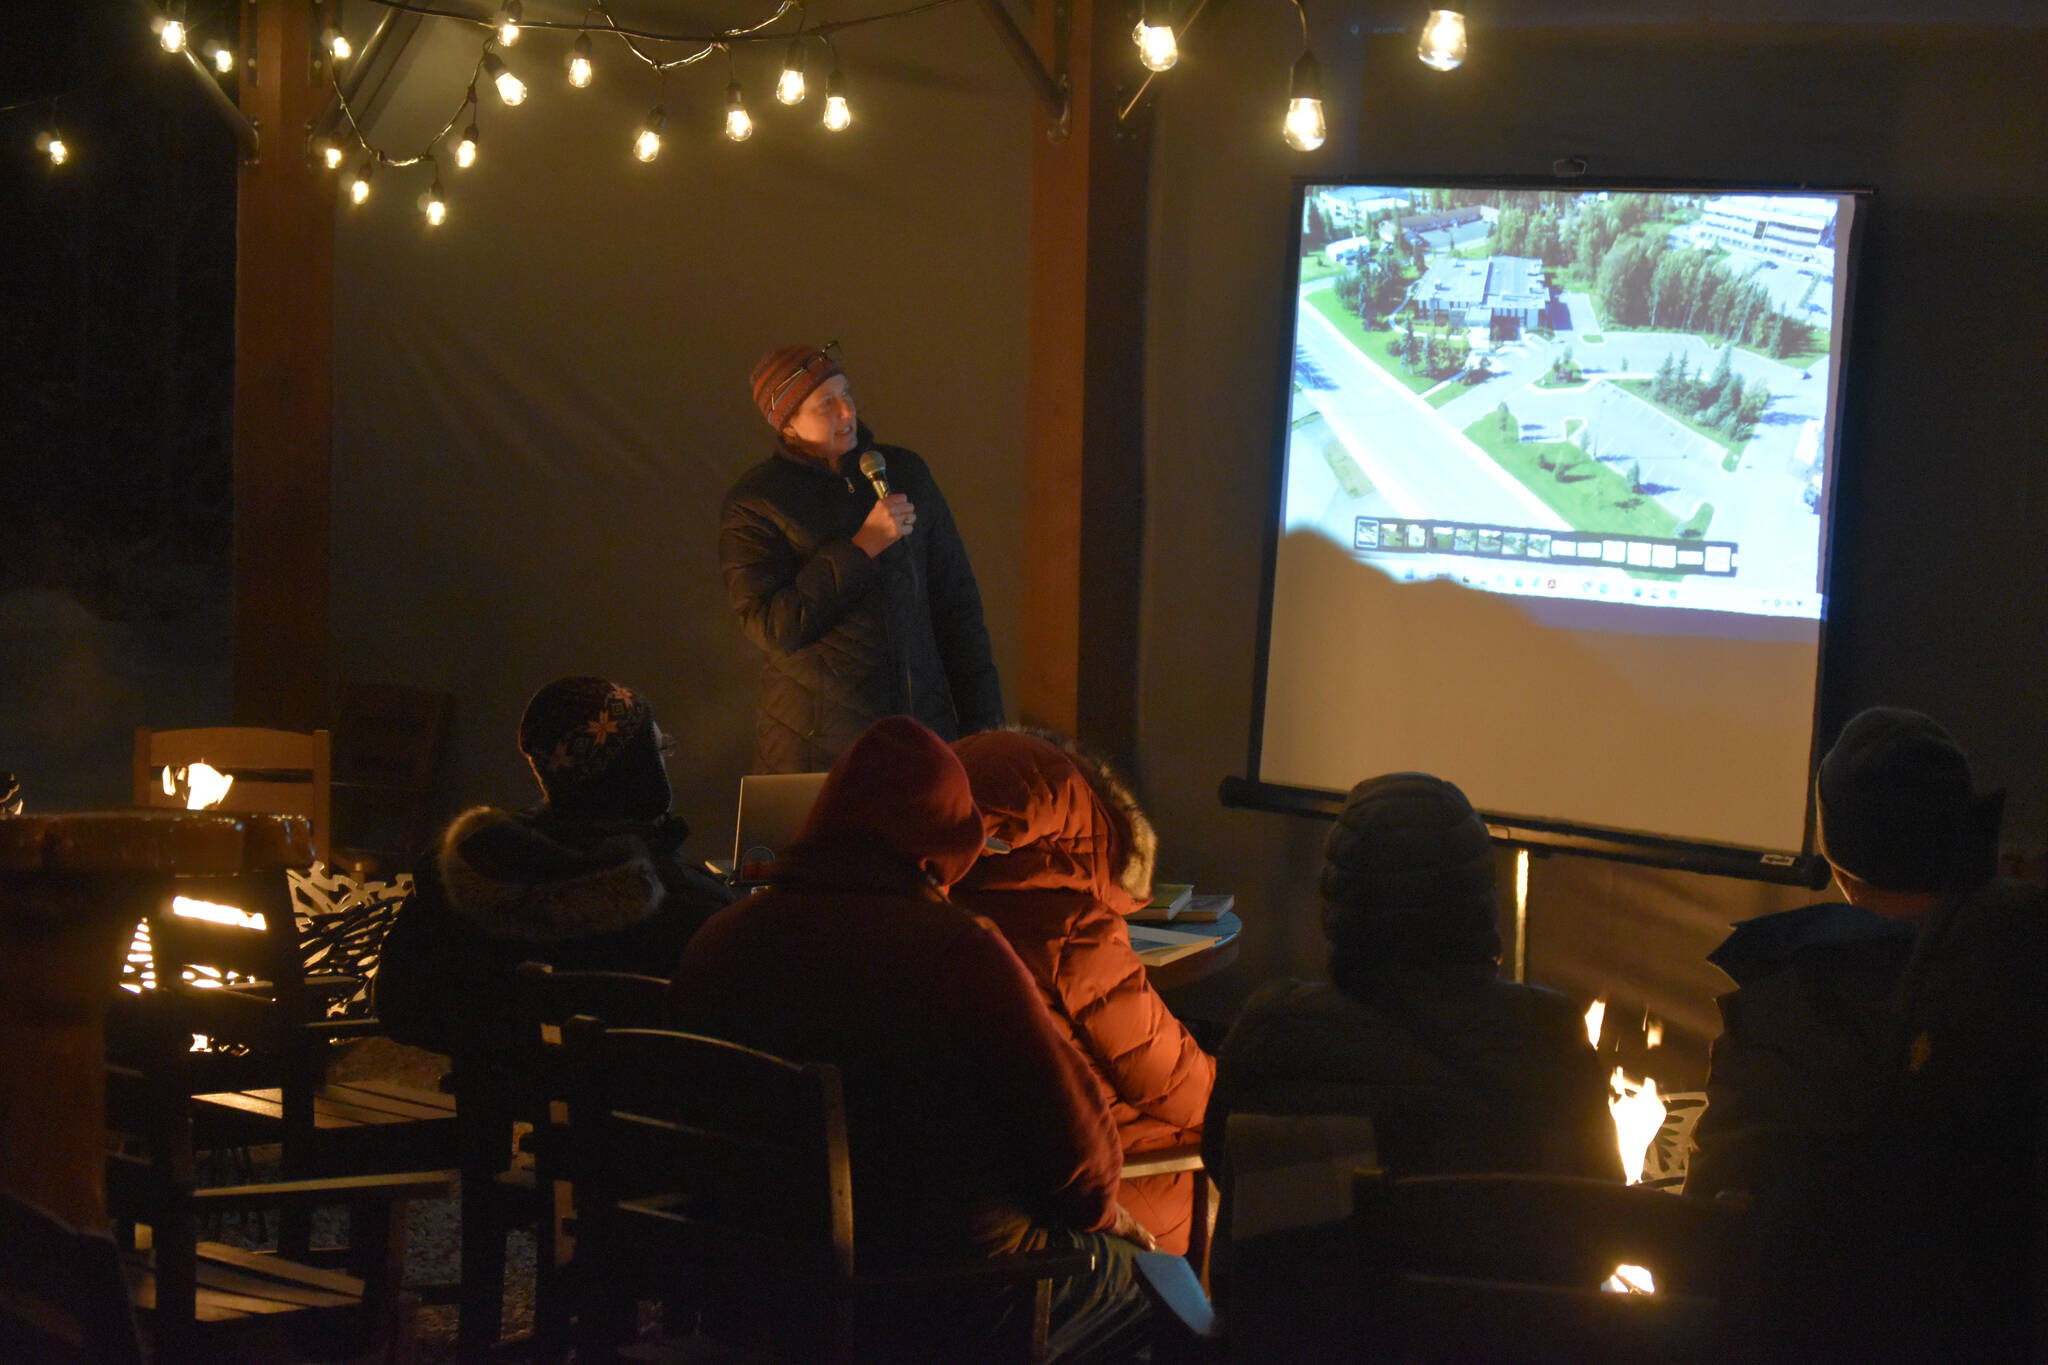 Architect Nancy Casey speaks in front of a small gathering at the Fireside Chat presented by the Kenai Watershed Forum on Nov. 30, 2022, at Kenai River Brewing in Soldotna, Alaska. (Jake Dye/Peninsula Clarion)